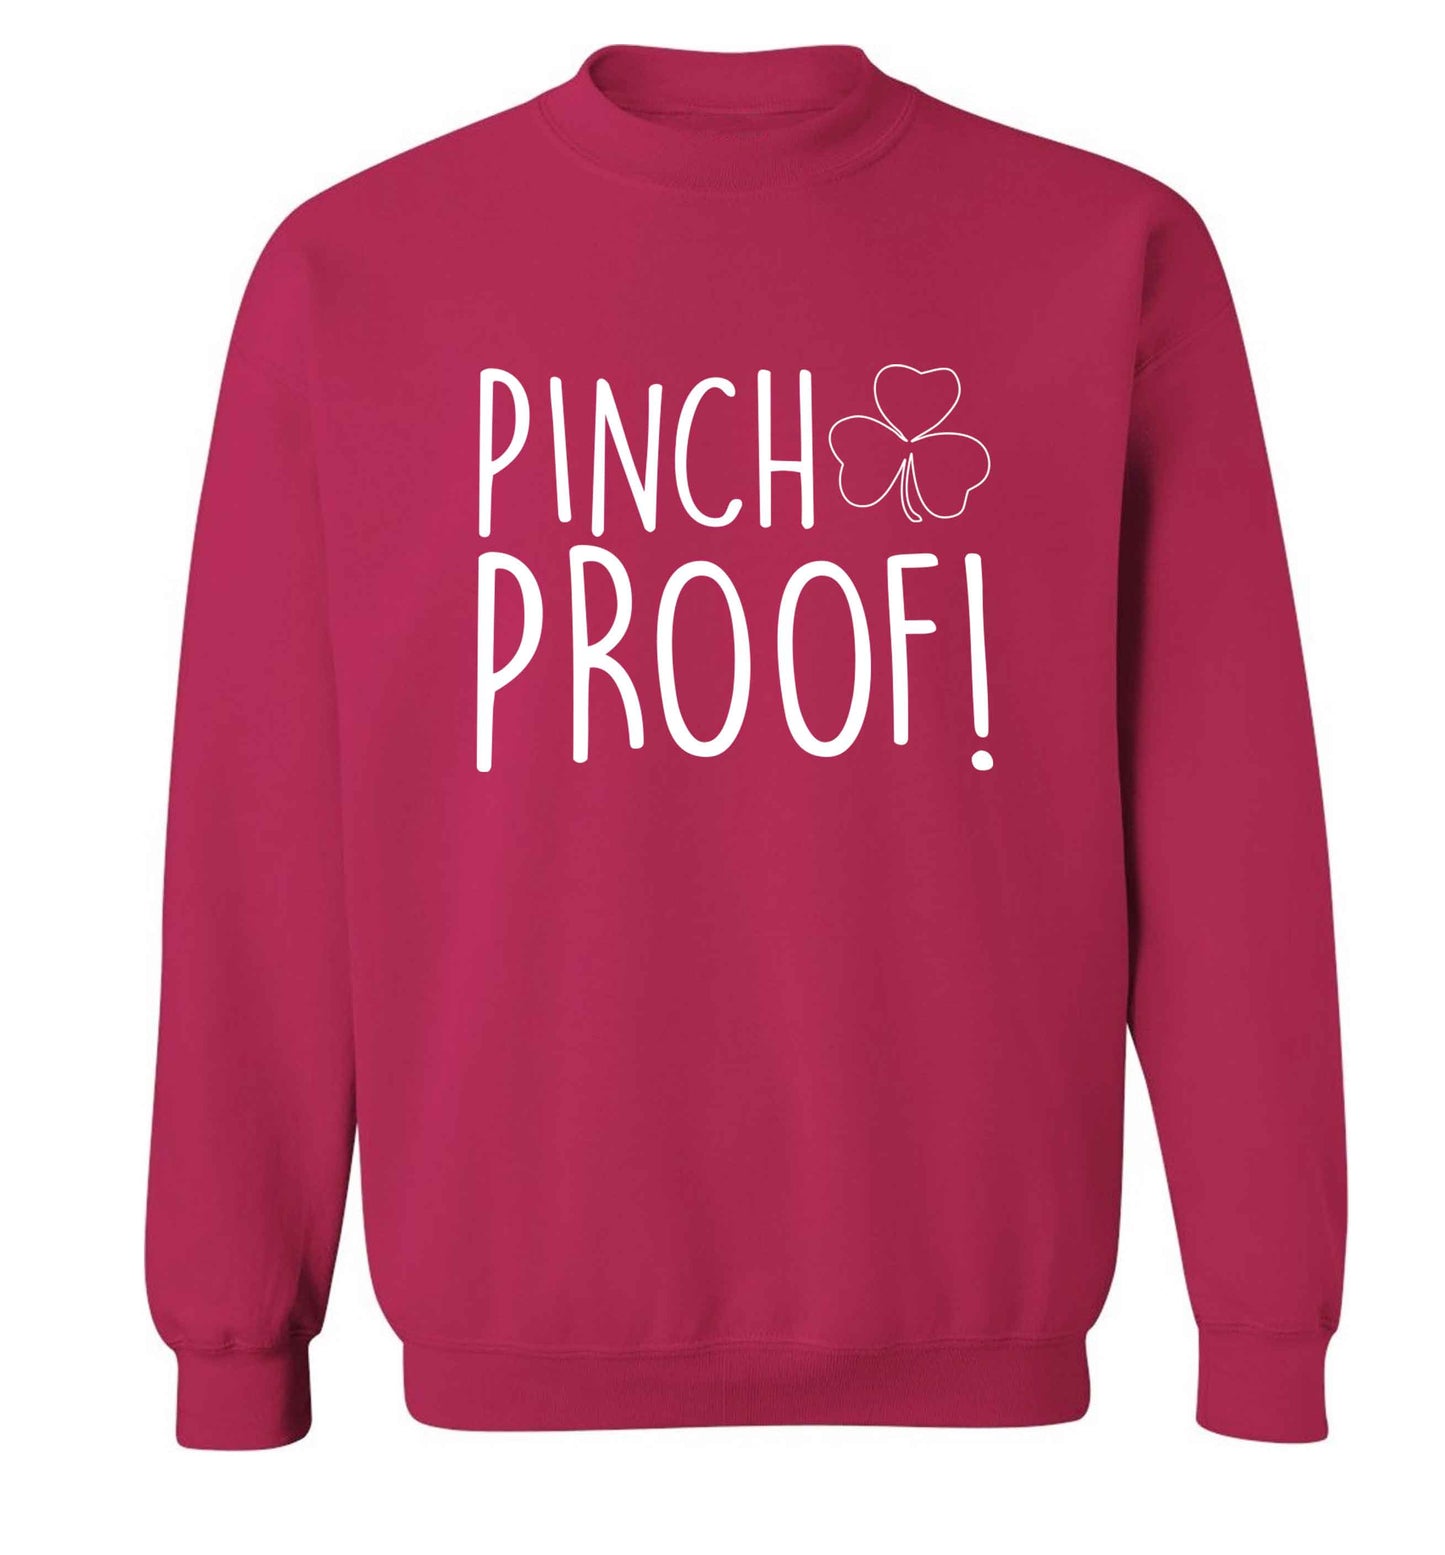 Pinch Proof adult's unisex pink sweater 2XL